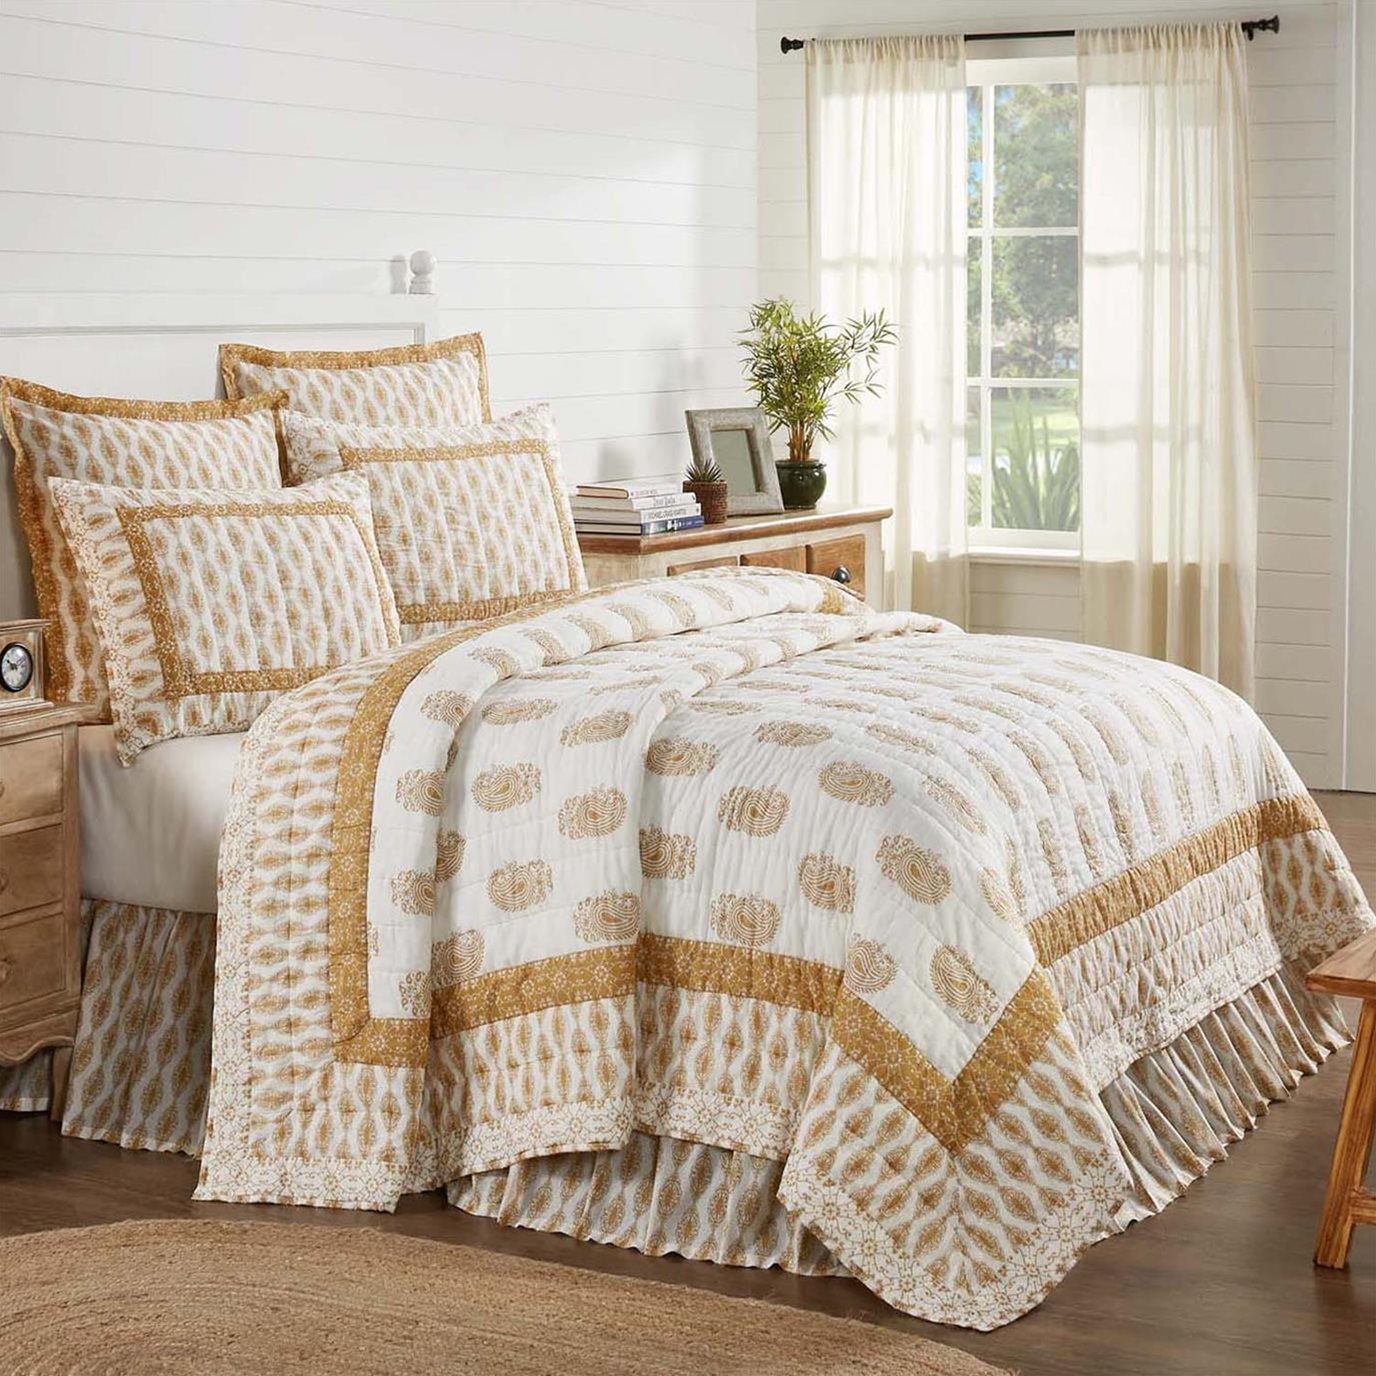 Avani Gold Queen Quilt 90Wx90L by April & Olive - VHC Brands